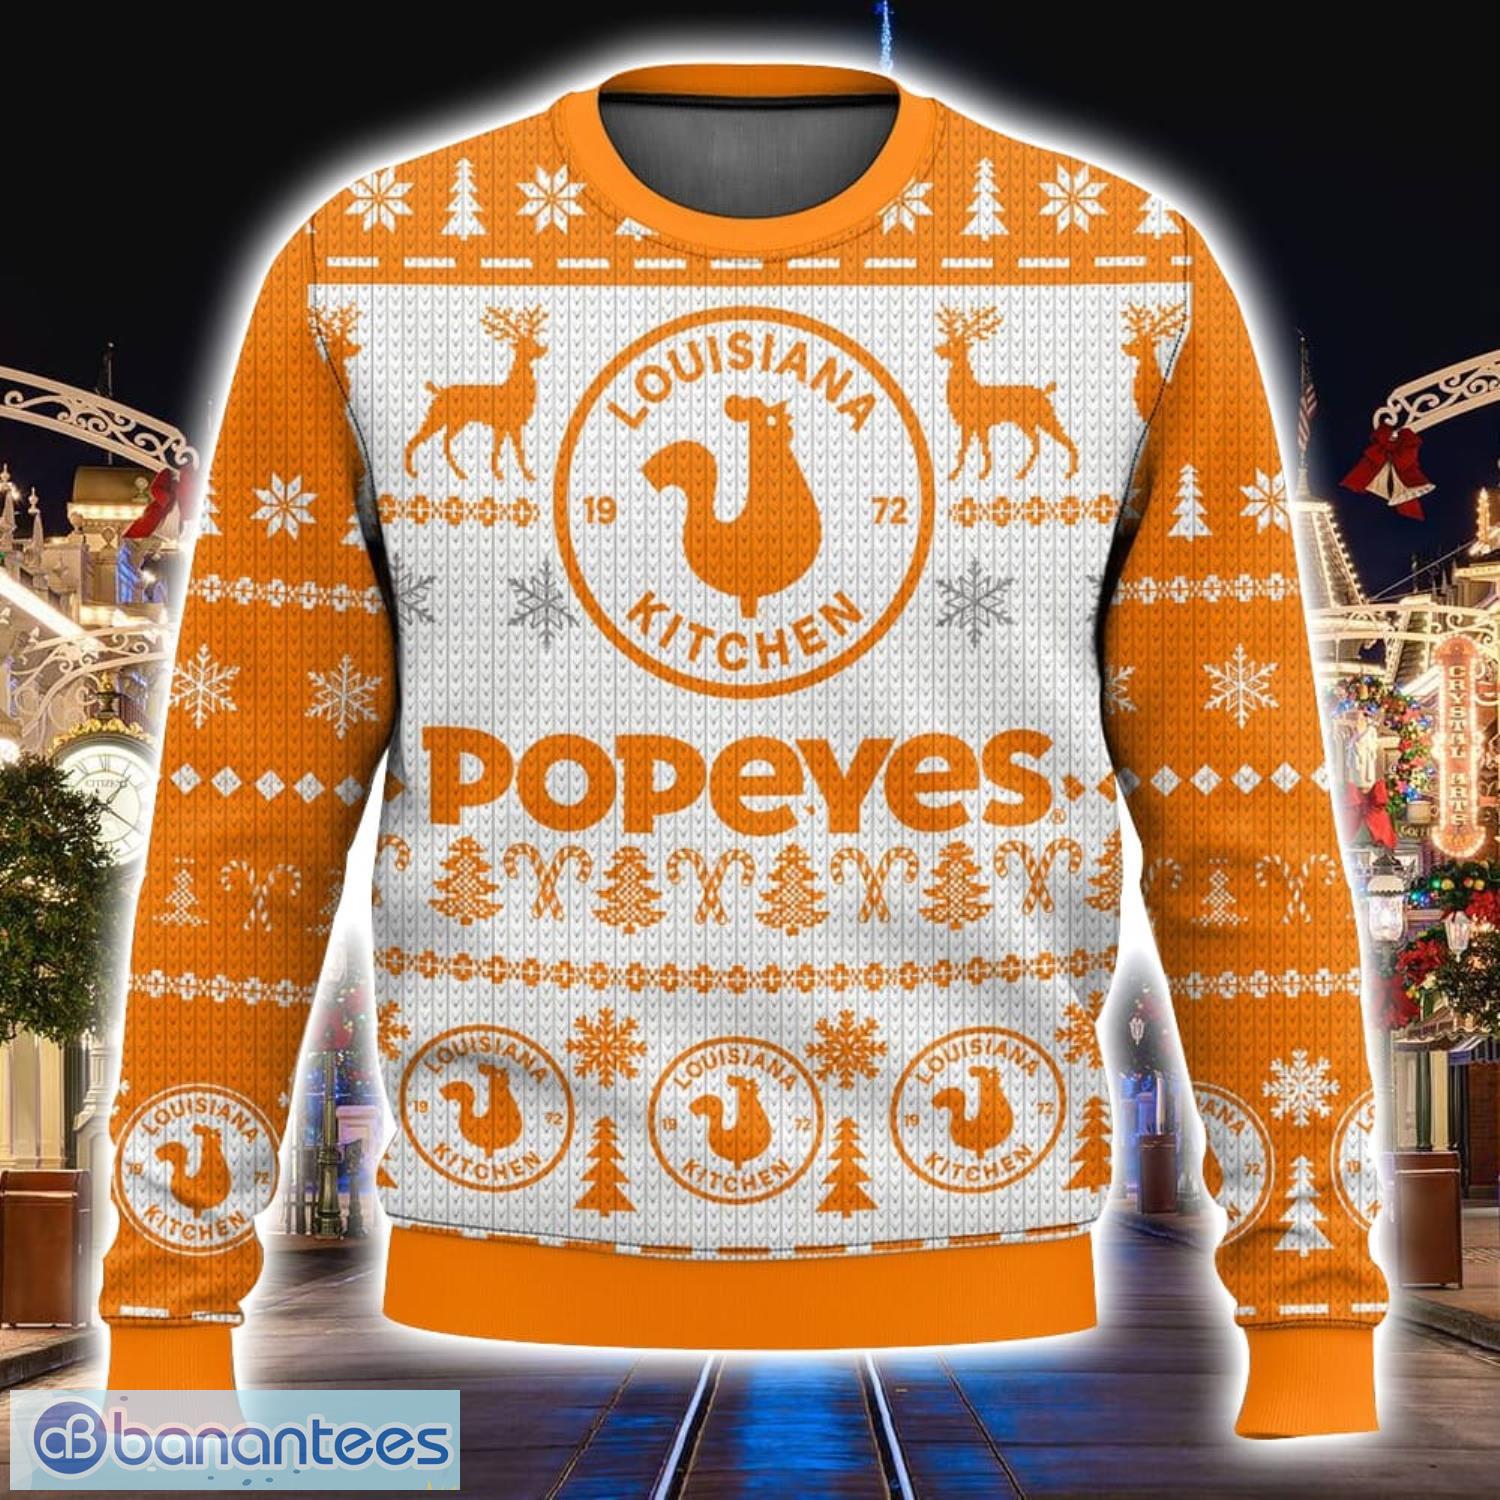 Sushi Lover Ugly Christmas Sweater All Over Printed 3D Sweater Xmas  Christmas Gift - Banantees